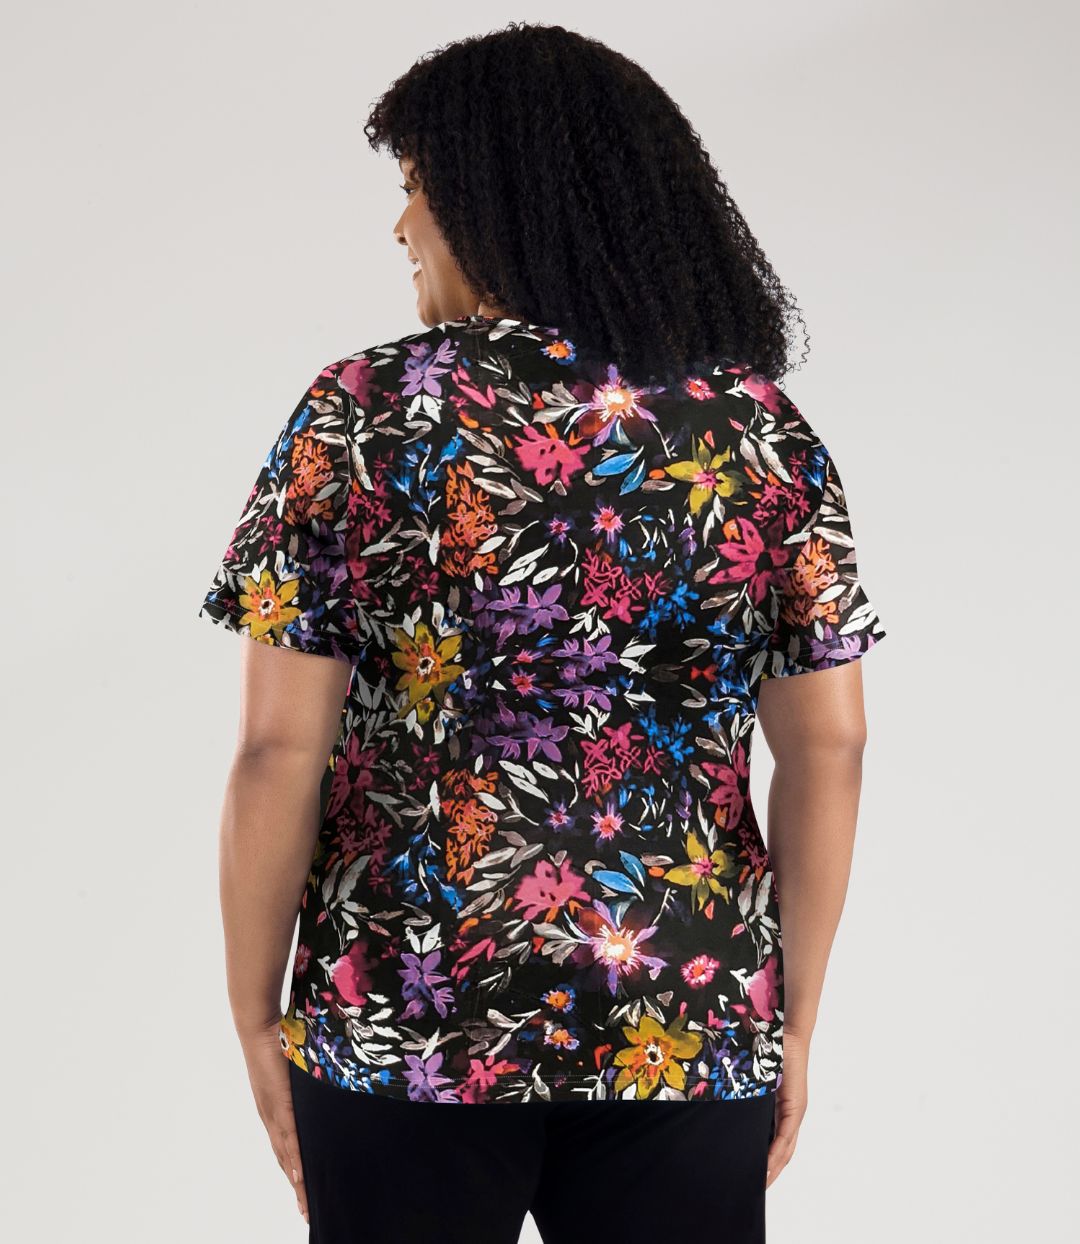 Model, facing back, wearing Junonia Lifestyle Printed Short Sleeve V-Neck top in floral forest print.